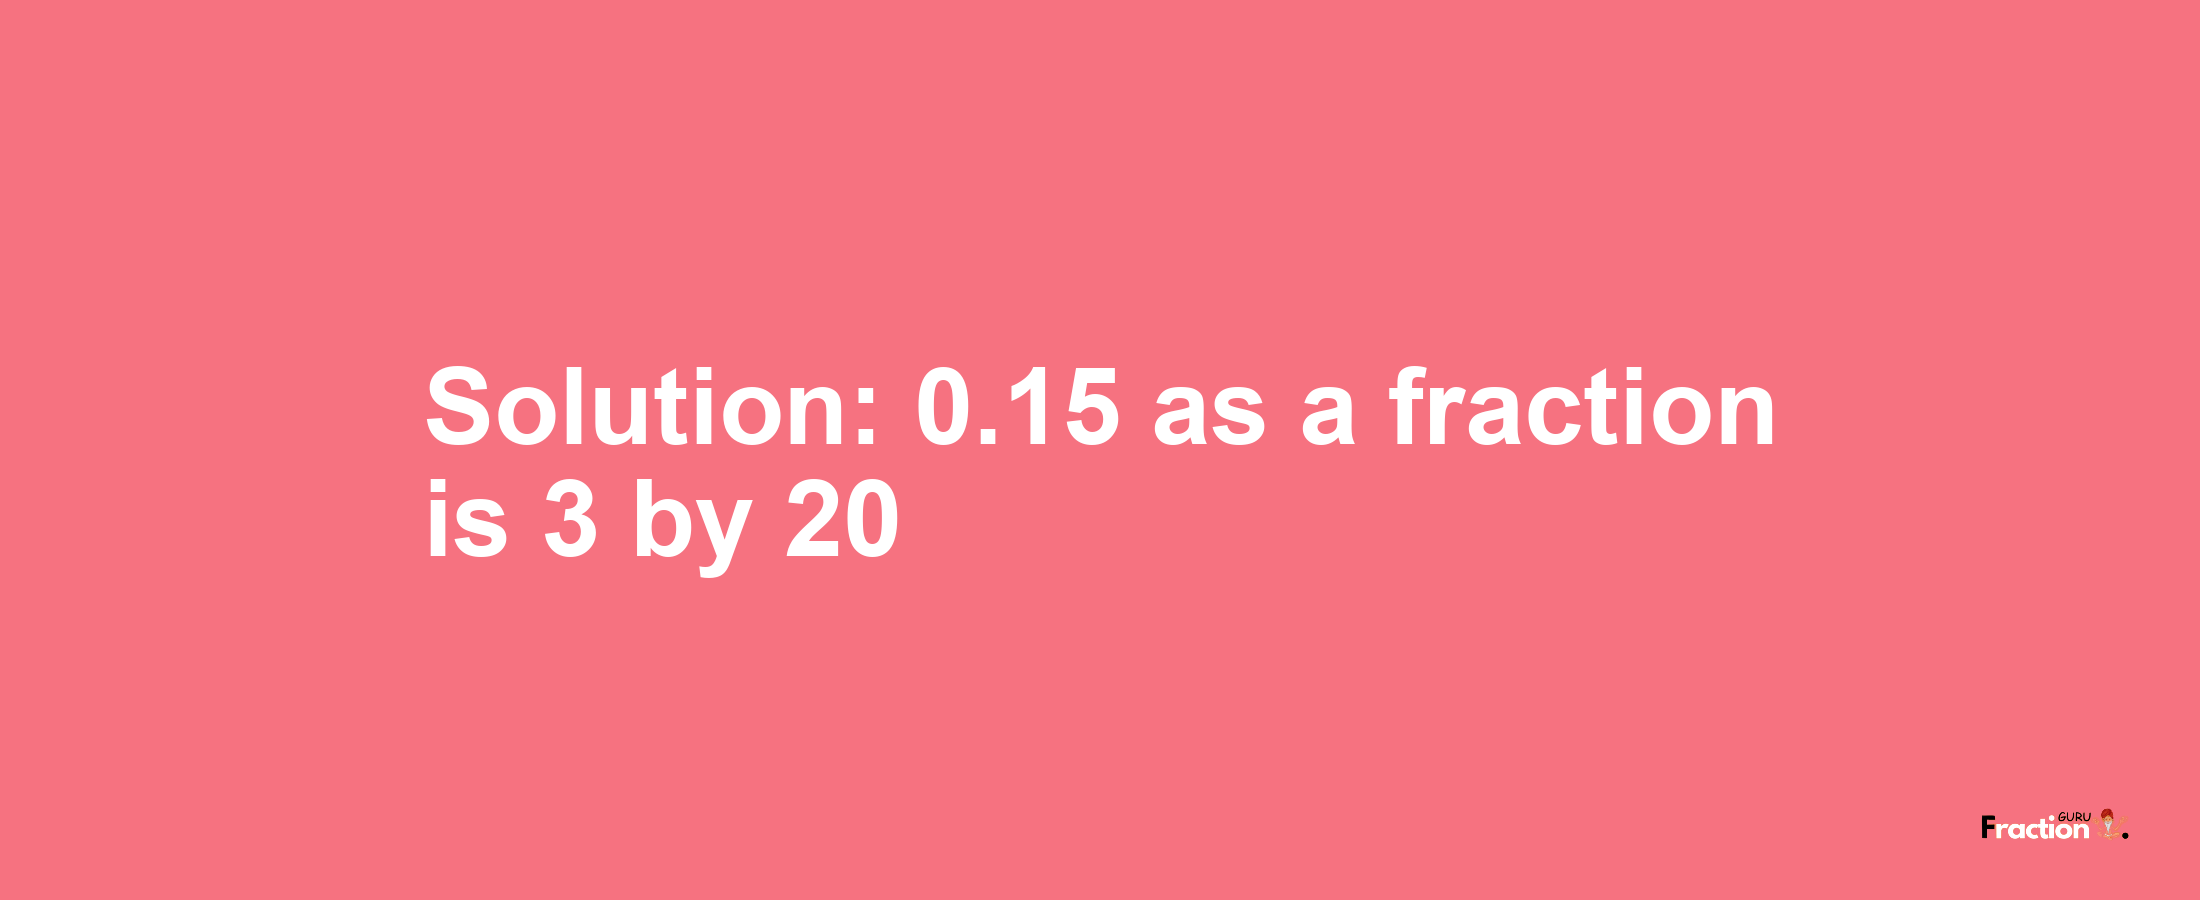 Solution:0.15 as a fraction is 3/20